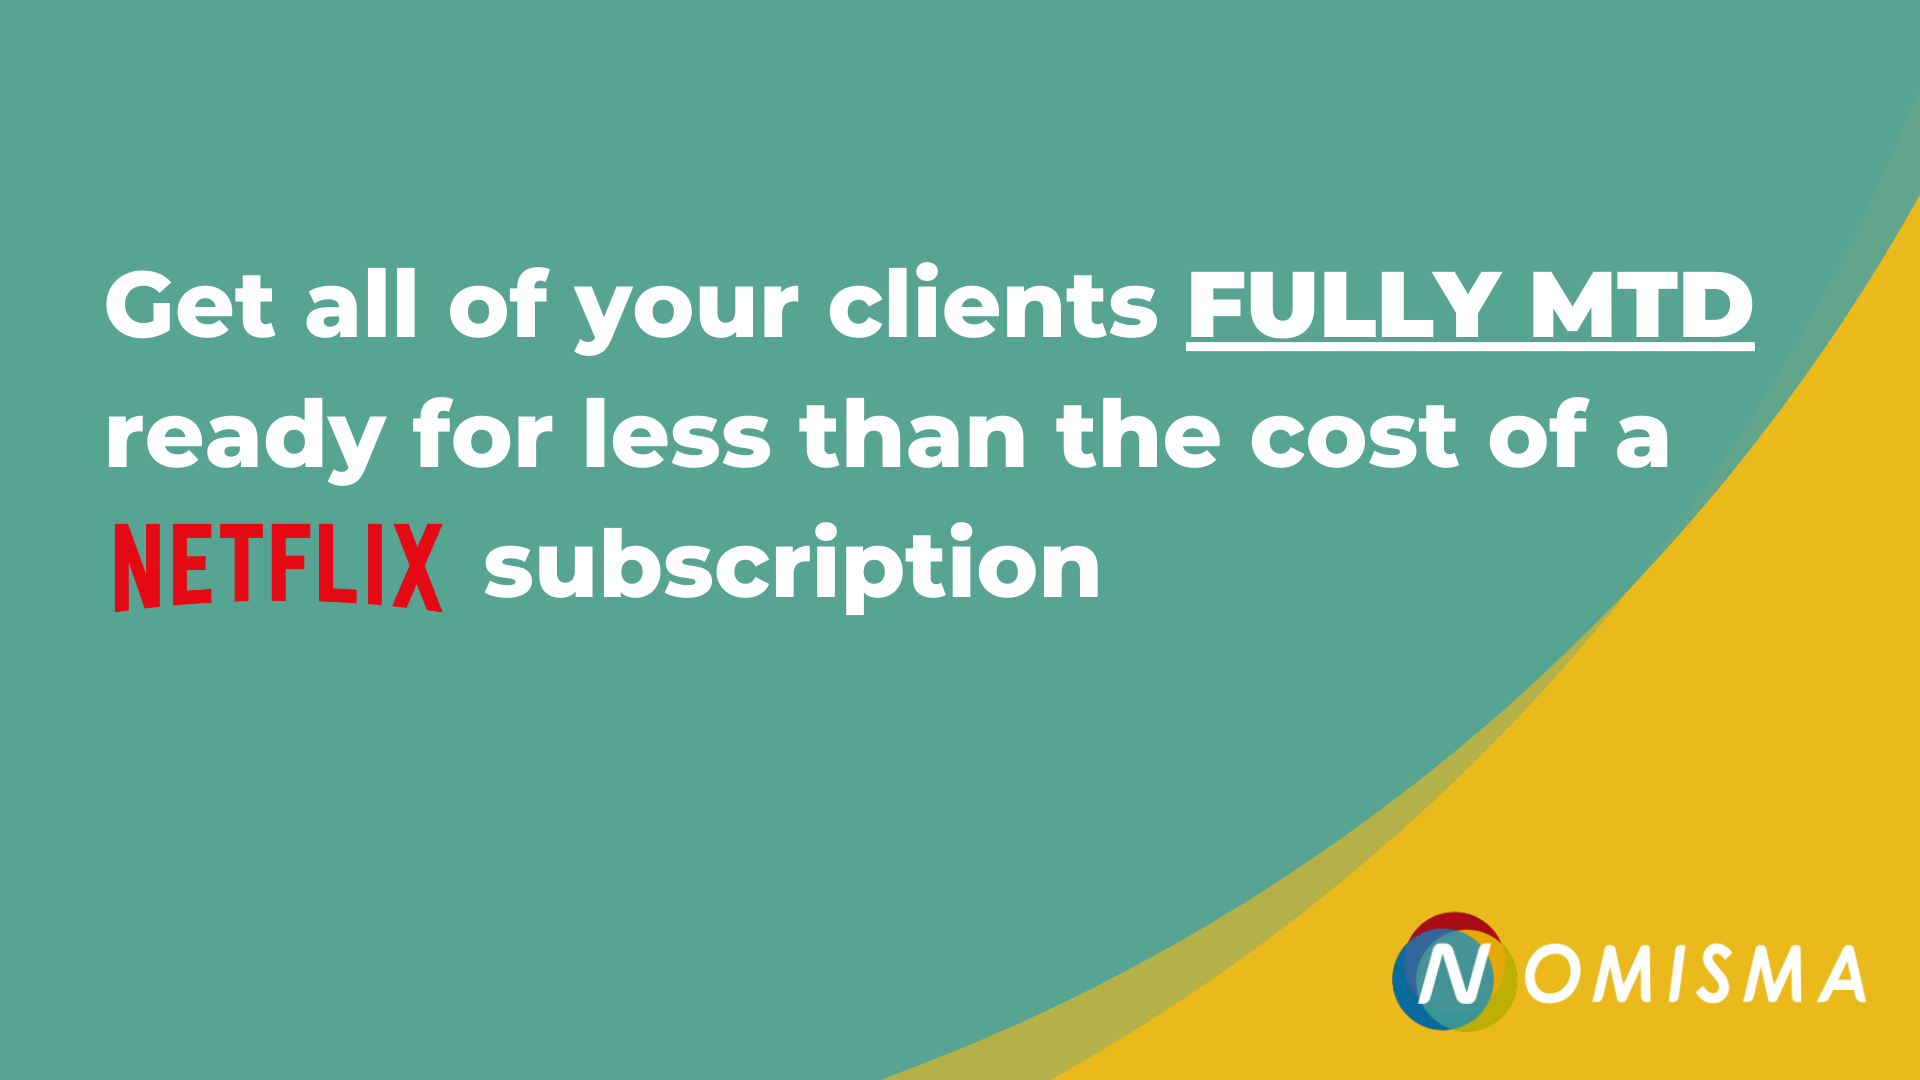 Get all of your clients fully MTD ready for less than the cost of a Netflix subscription